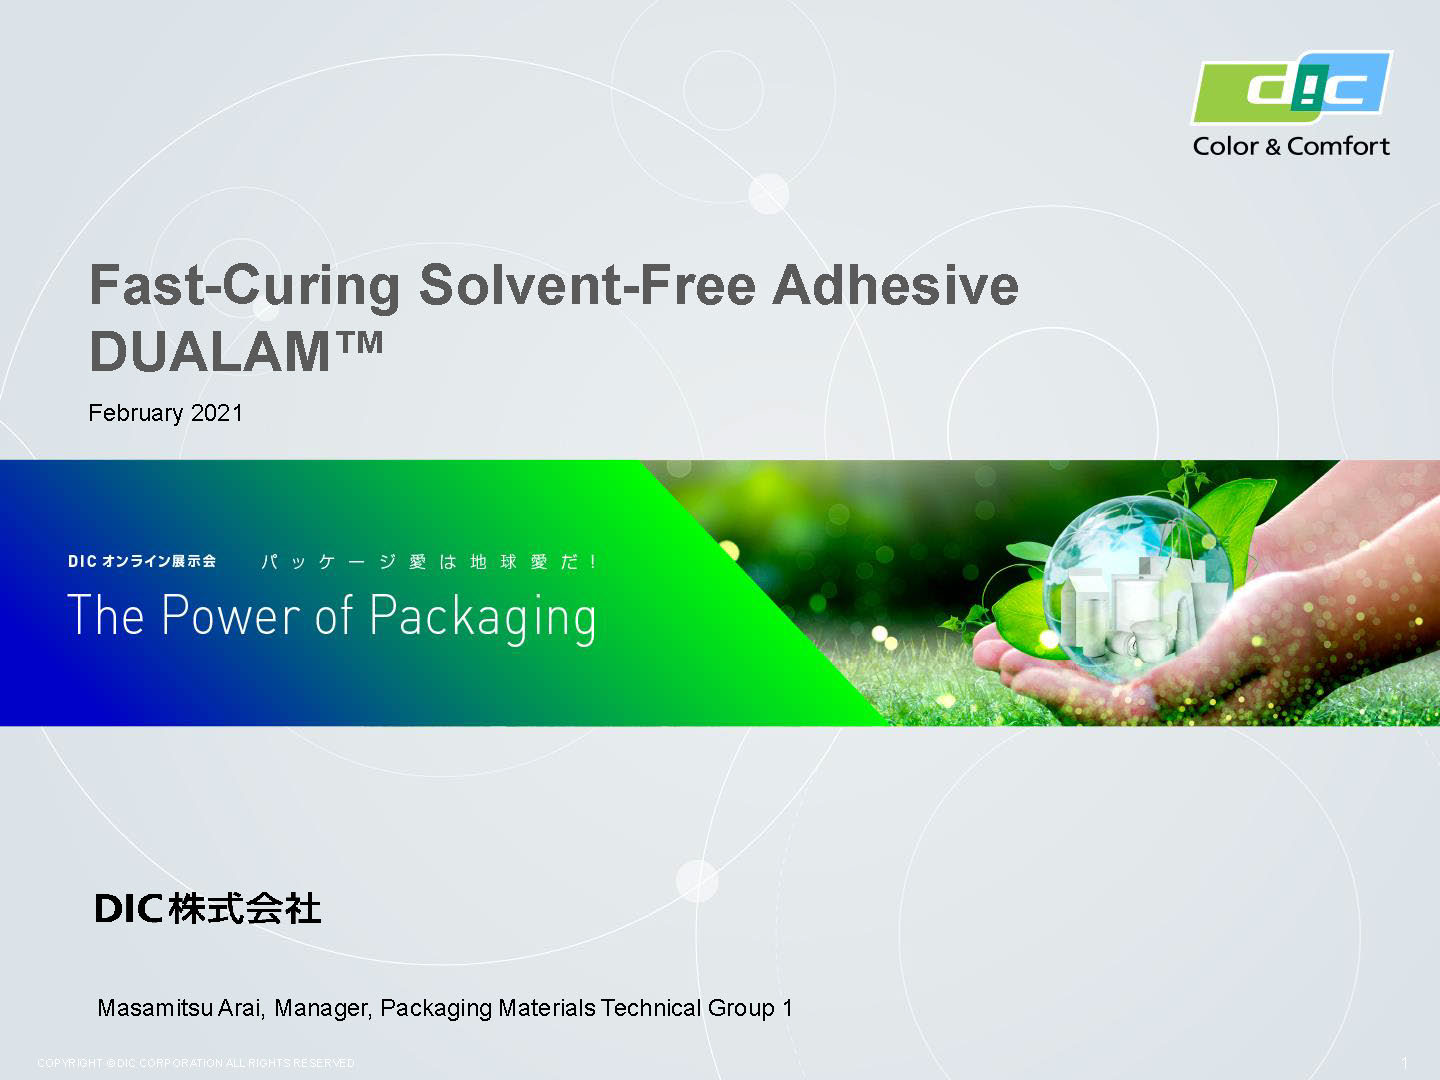 Fast-Curing Solvent-Free Adhesive DUALAM™